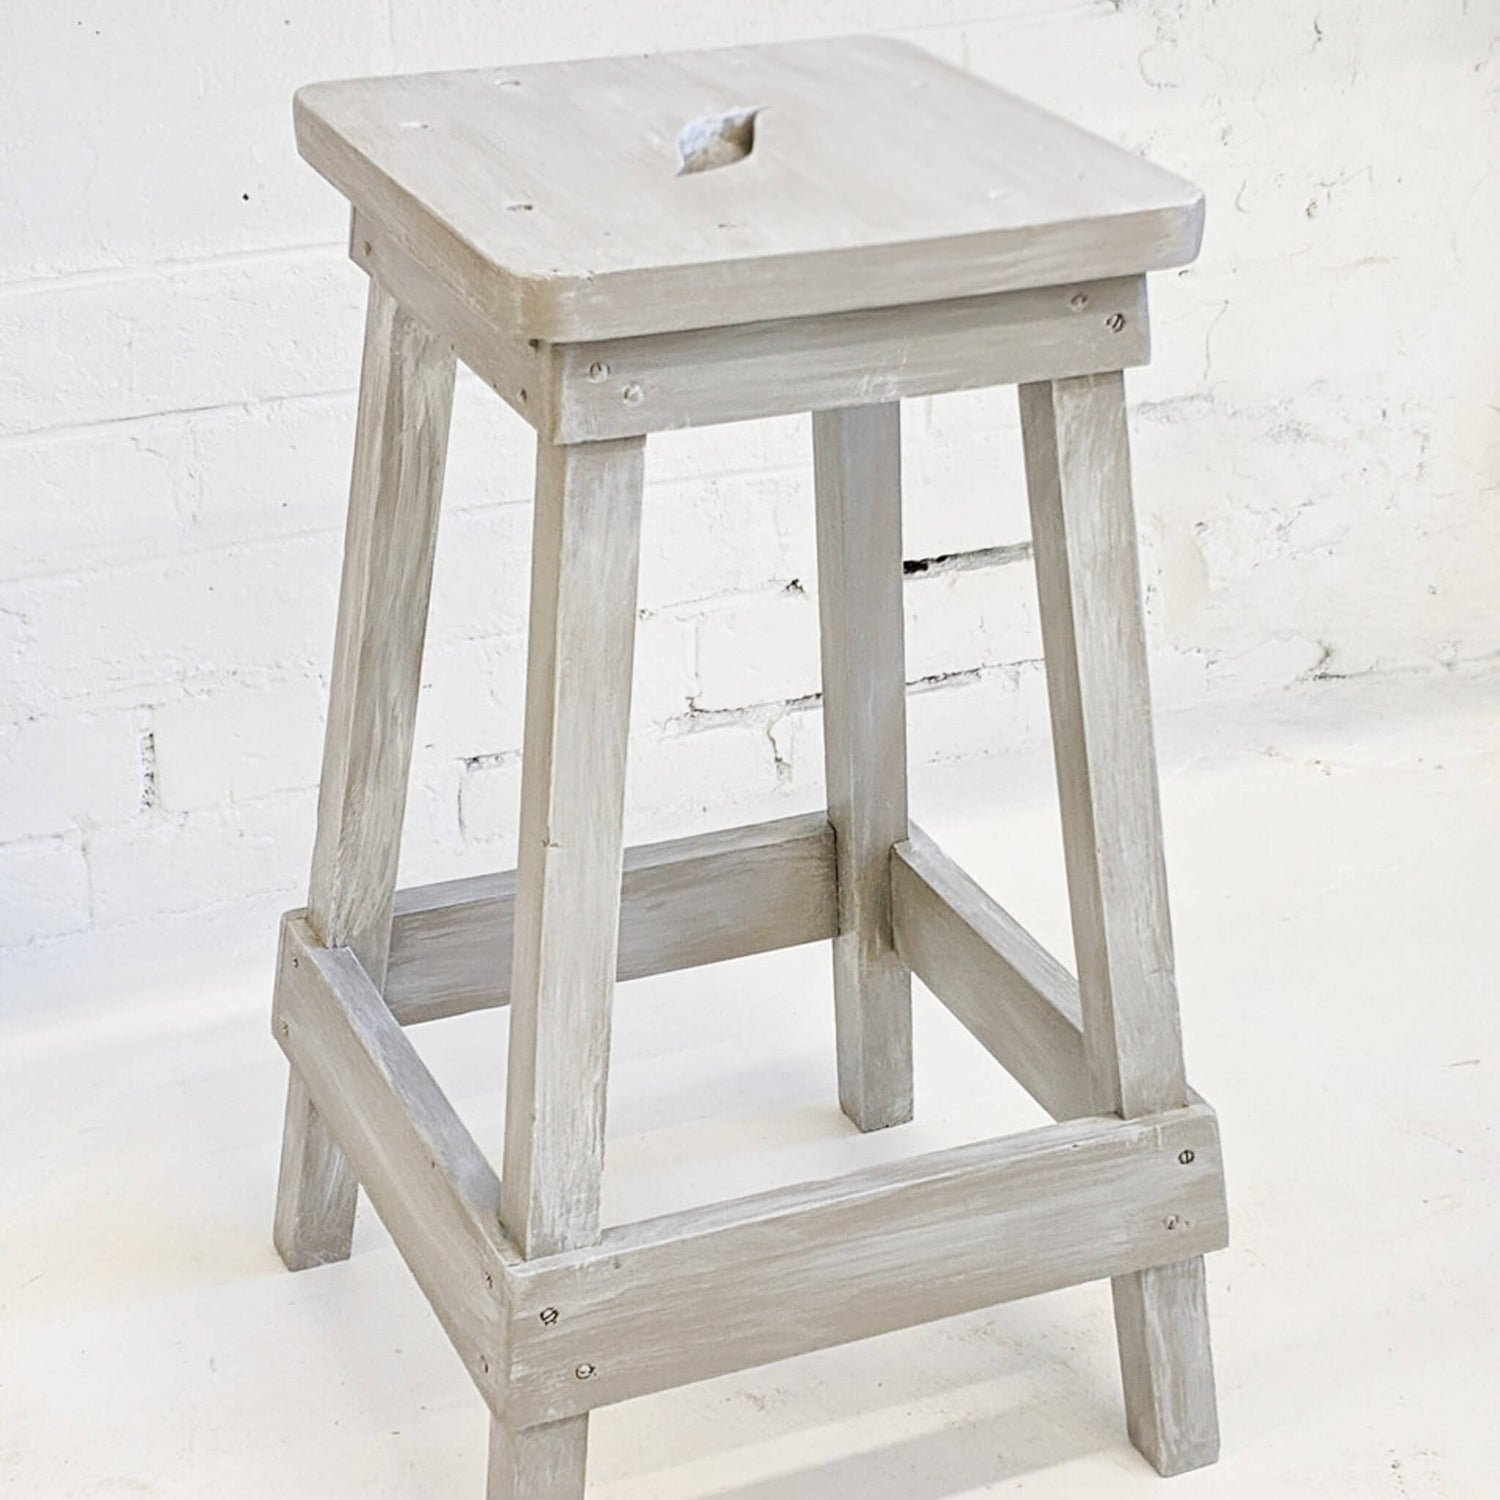 Timber stool painted French Linen and White Wash using Blake & Taylor Chalk Furniture Paint